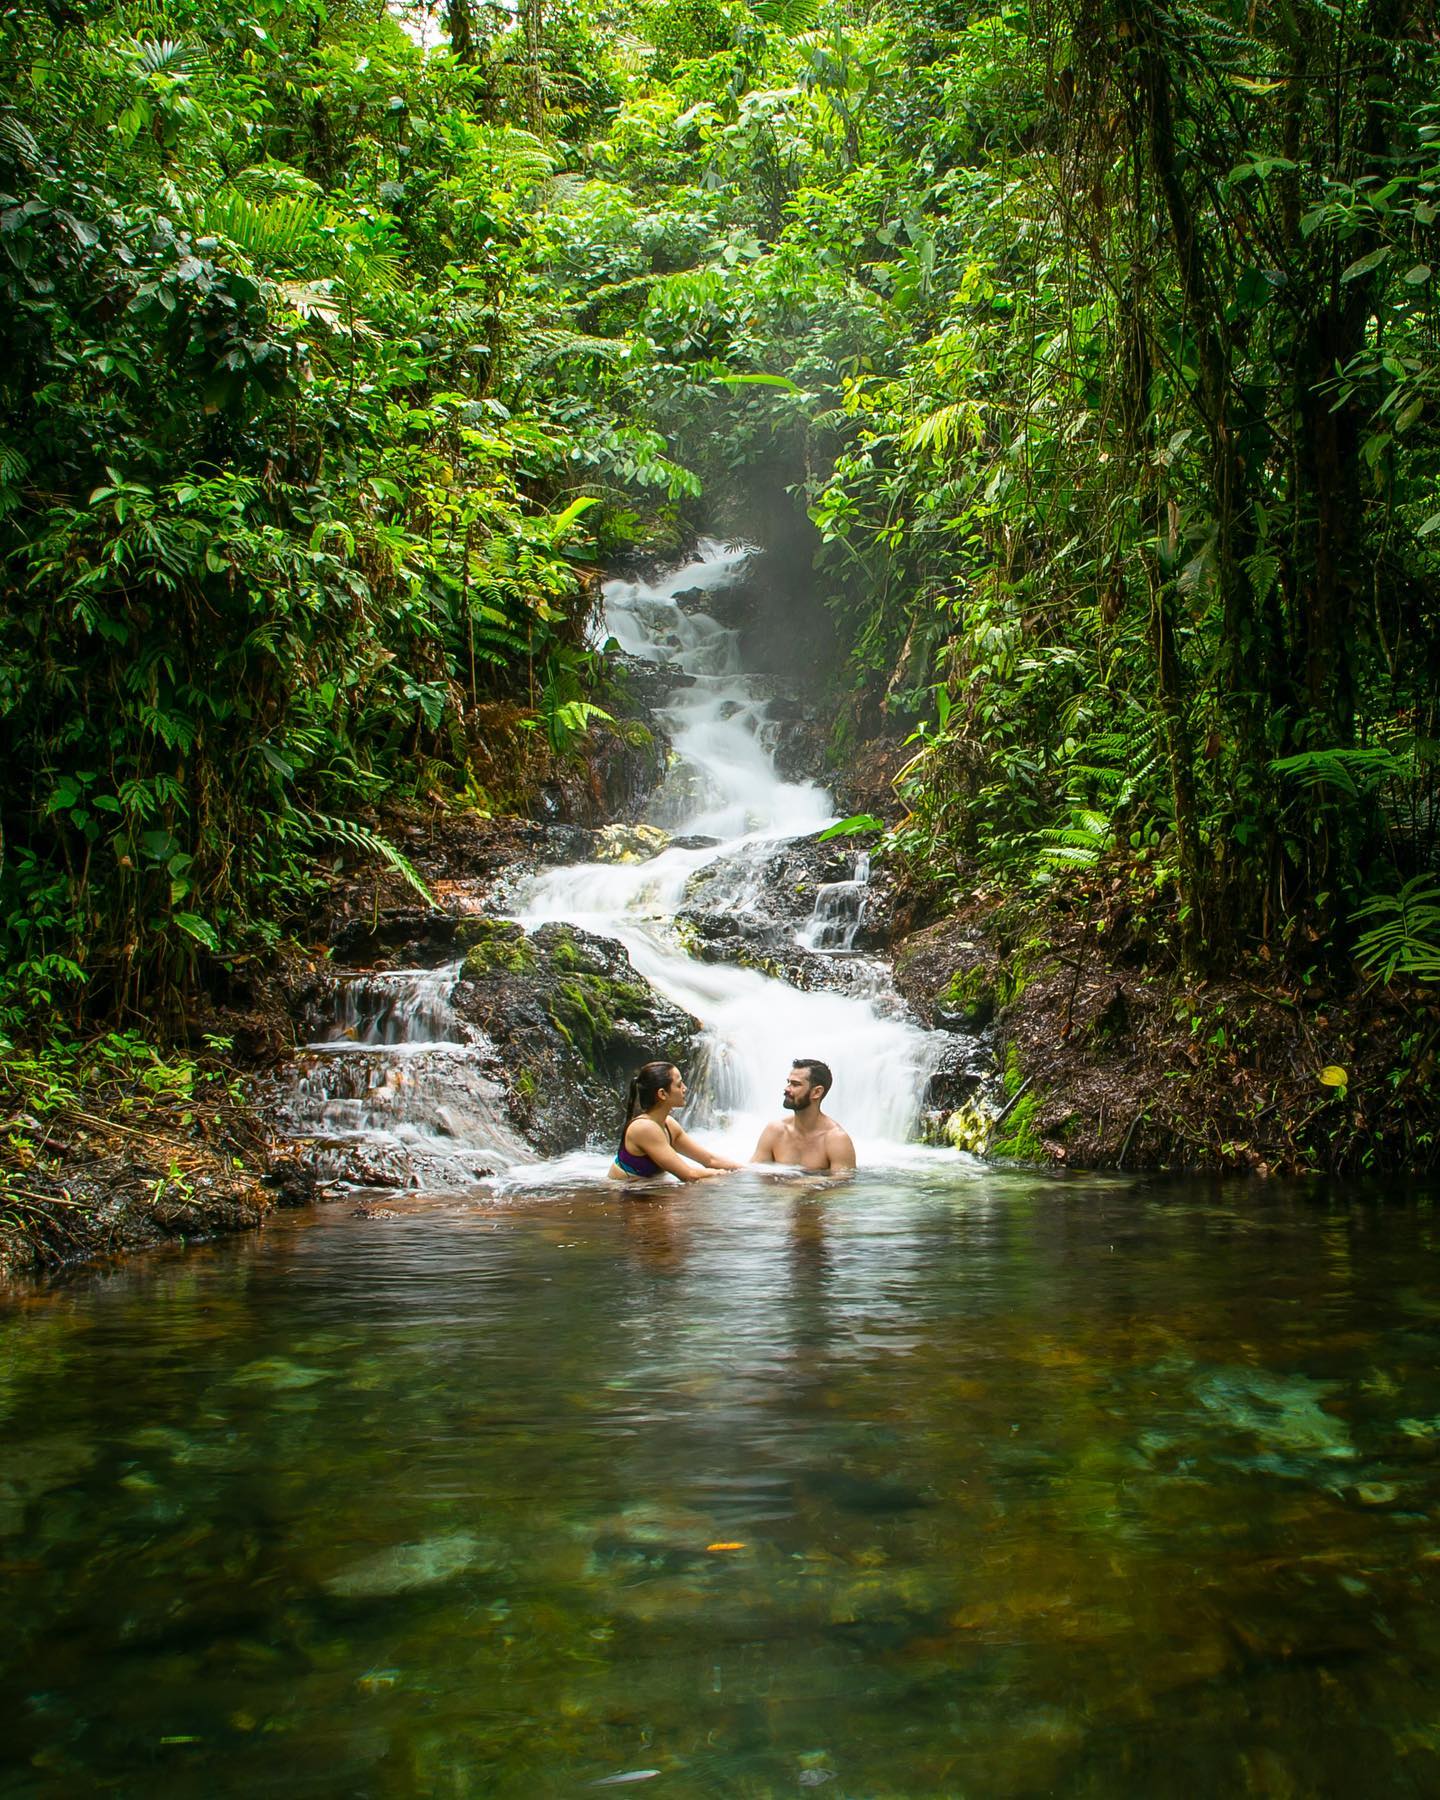 Luxurious privacy in the rainforest.
.
Delight yourself in our selection of private rainforest thermal pools. Reservations only!
.
Reserve your visit today at www.sensoria.cr or via WhatsApp at +506 8955-4971.
.
#experiencesensoria
.
#costarica #visitcostarica #sustainabletravel #sustainability #tropical #rainforest #jungle #sustainabletourism #hiking #thisiscostarica #sensoria  #travel #luxury #costarica #thermalpools #wellness #wellnestravel